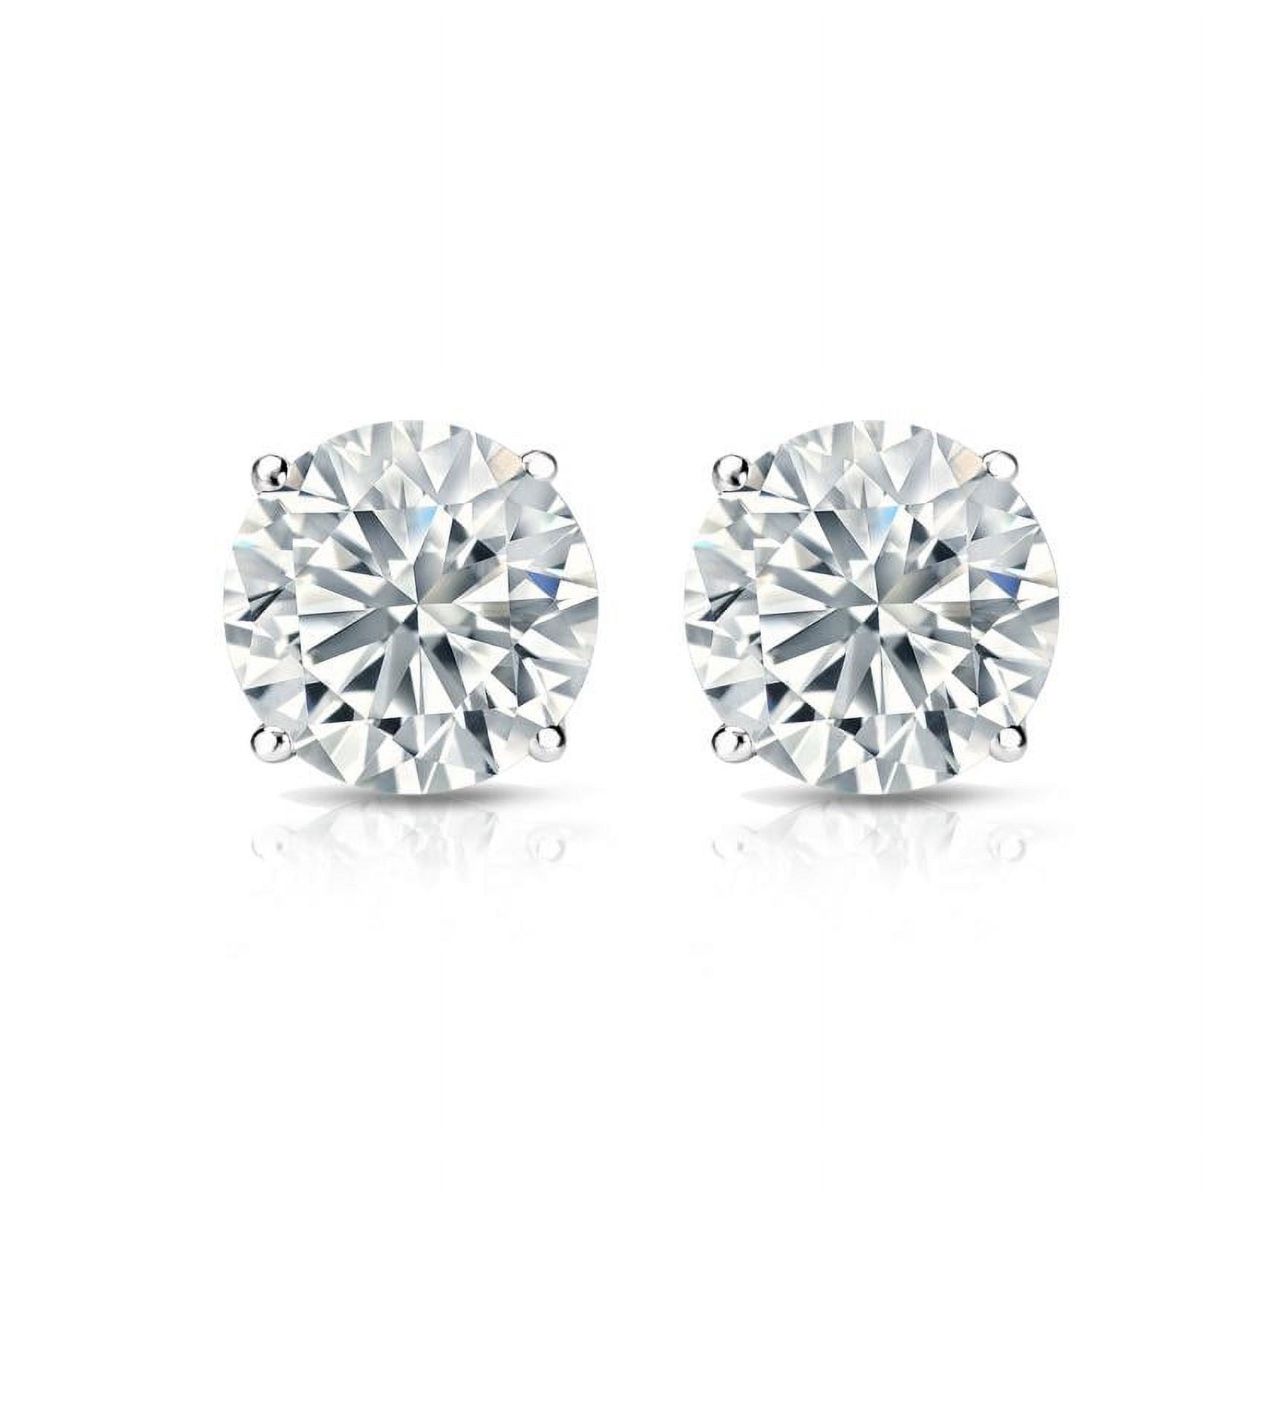 JeenMata 4 Prong 2 Carat Round Shaped Moissanite Solitaire Stud Earrings In 18K White Gold Plating Over Silver